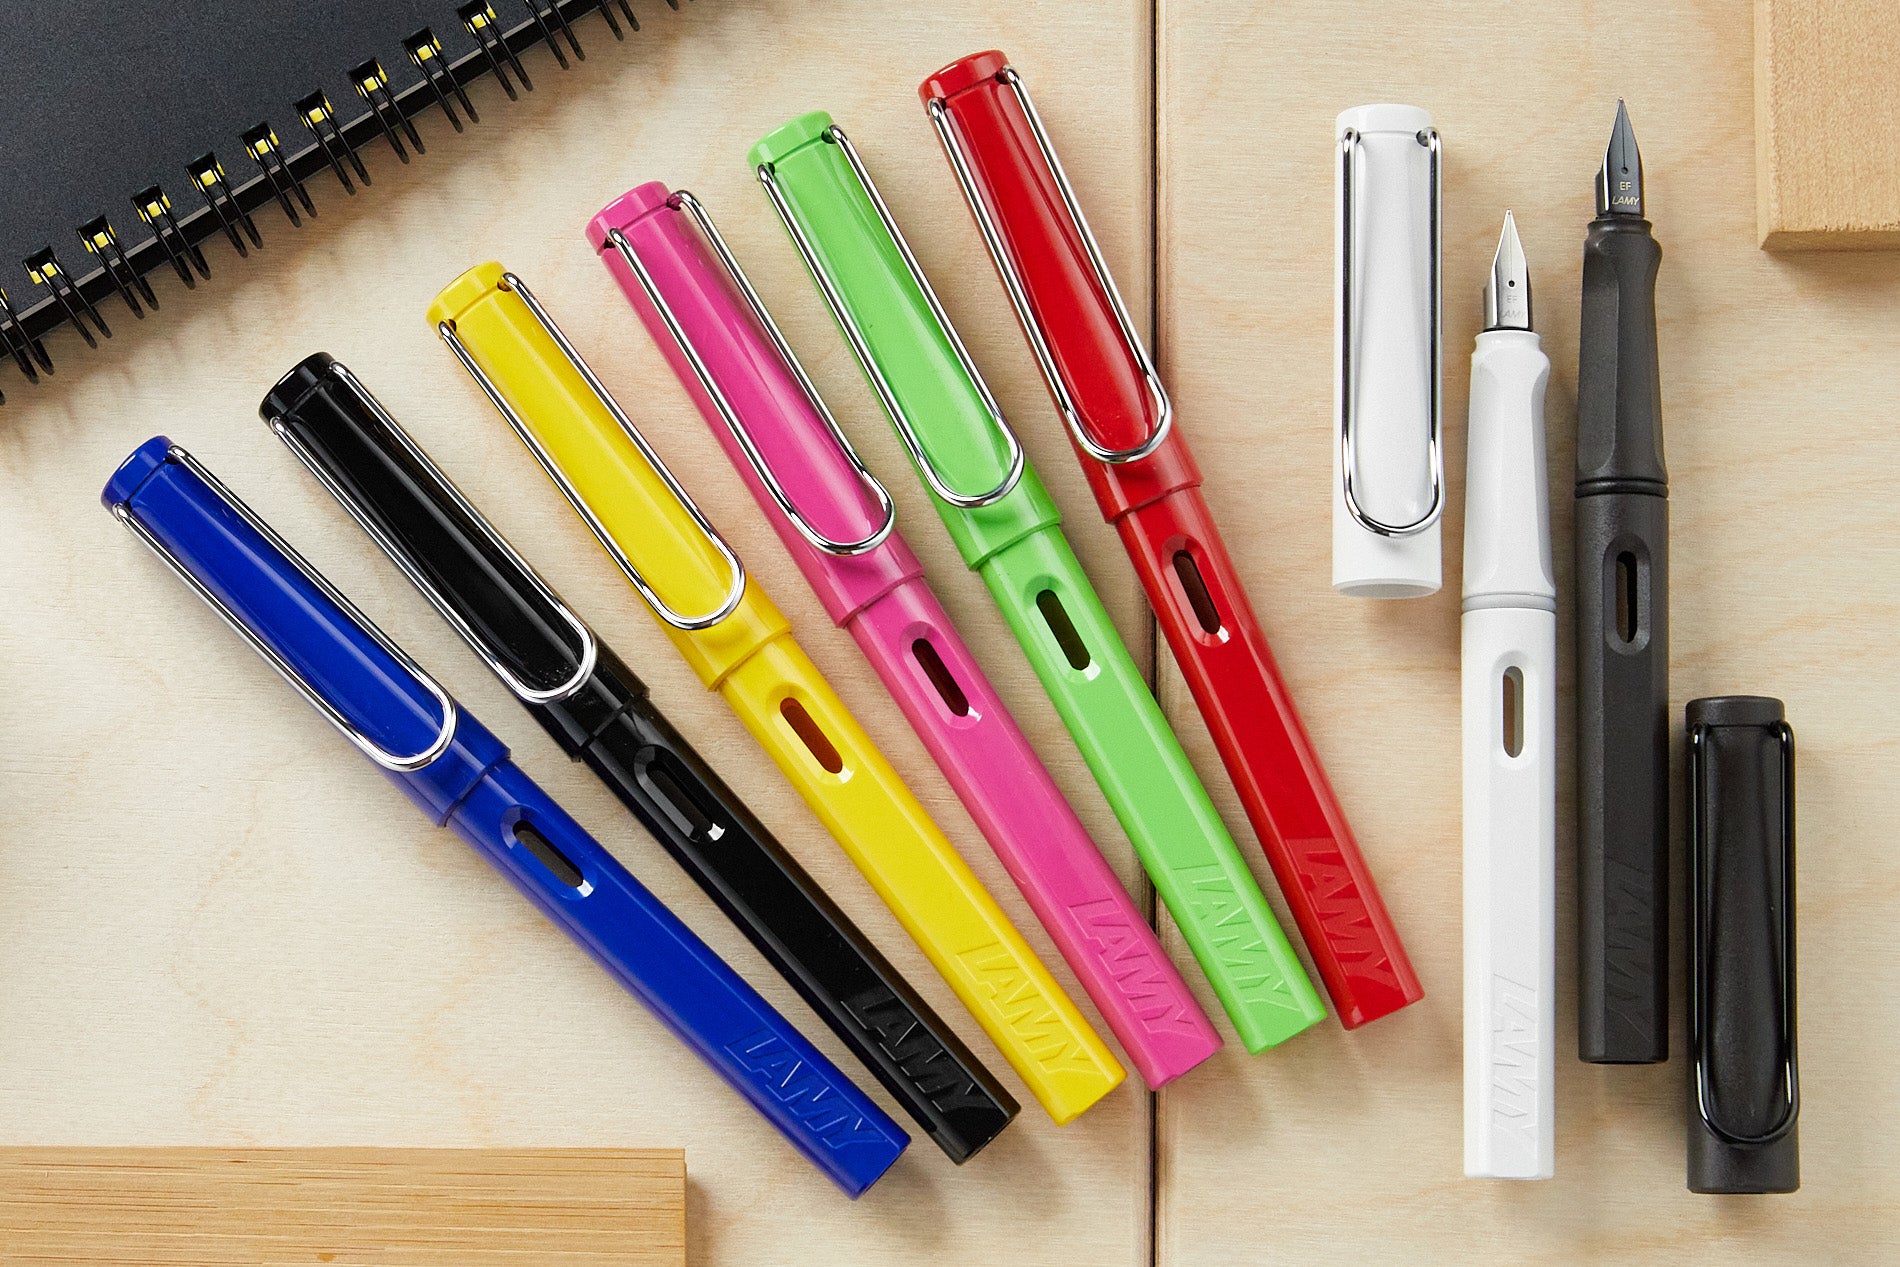 A fanned-out collection of colorful fountain pens